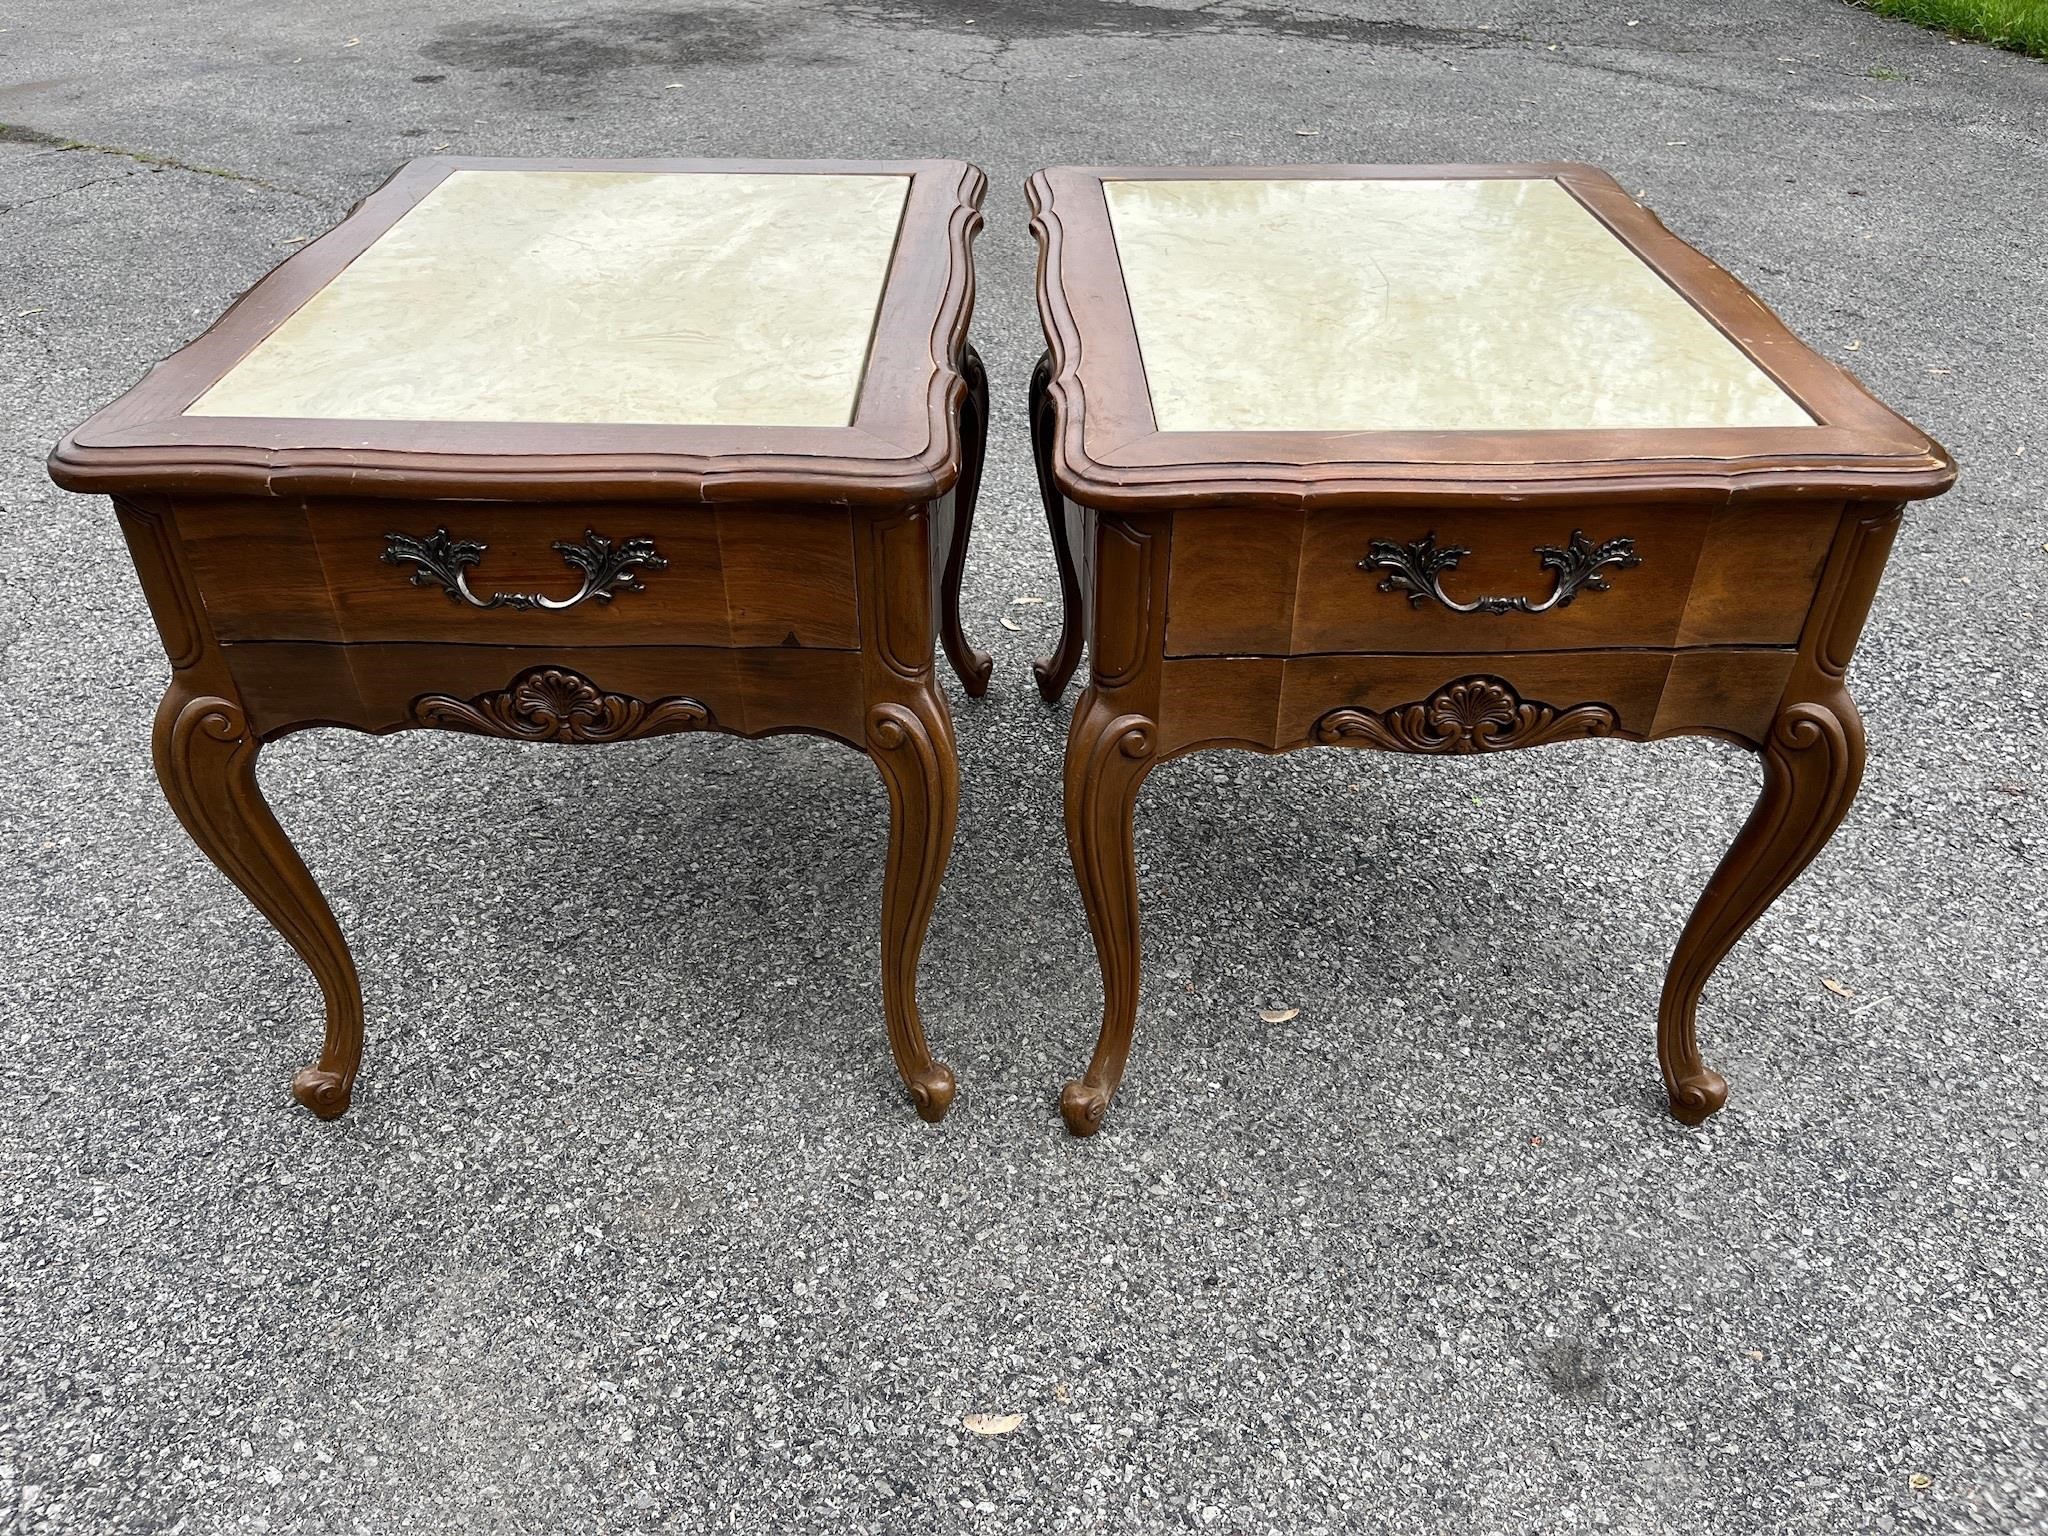 2 Vintage End Tables w/ Stone Tops